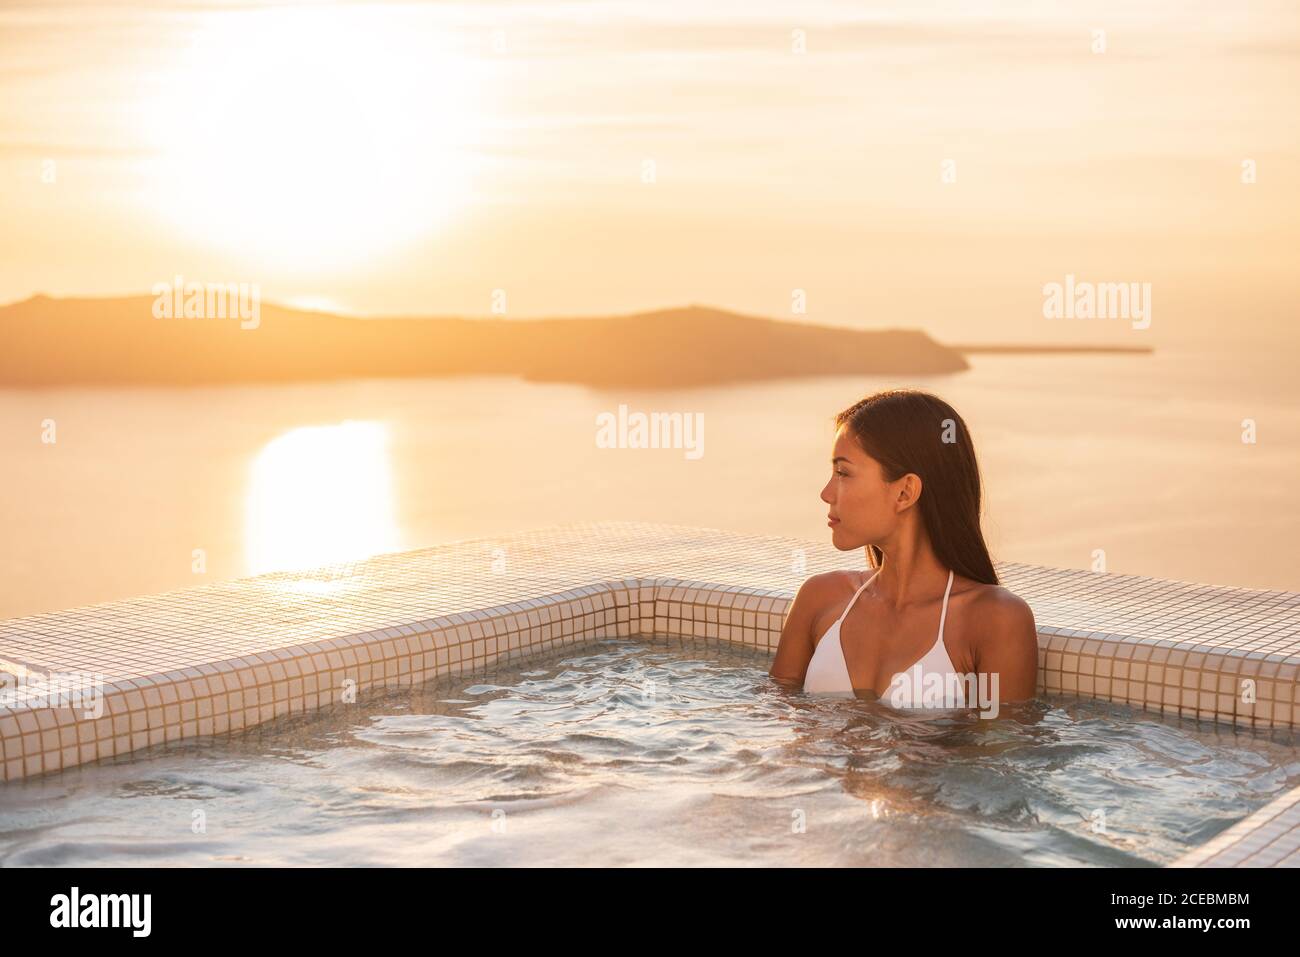 Luxury resort woman swimming in jacuzzi hot tub outside on private hotel room balcony watching sunset over Mediterranean sea. Europe honeymoon Stock Photo